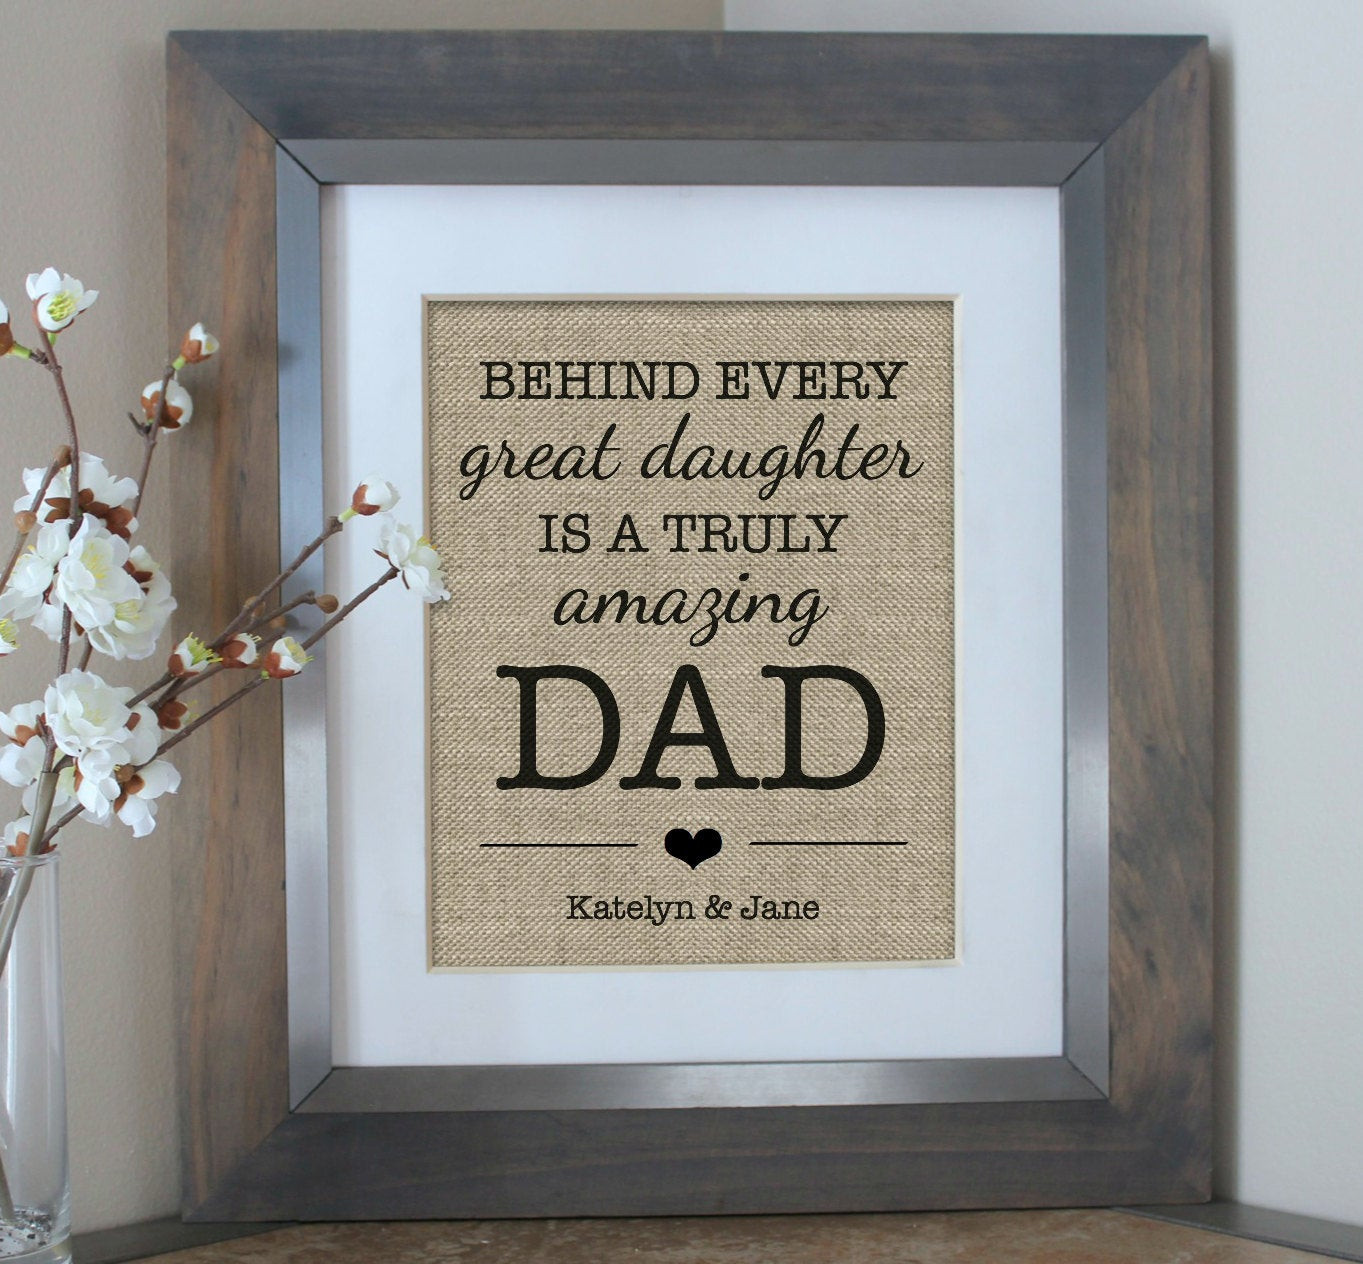 Personalized Gifts For Fathers Day
 Father s Day Gift Personalized Gift for Dad Fathers